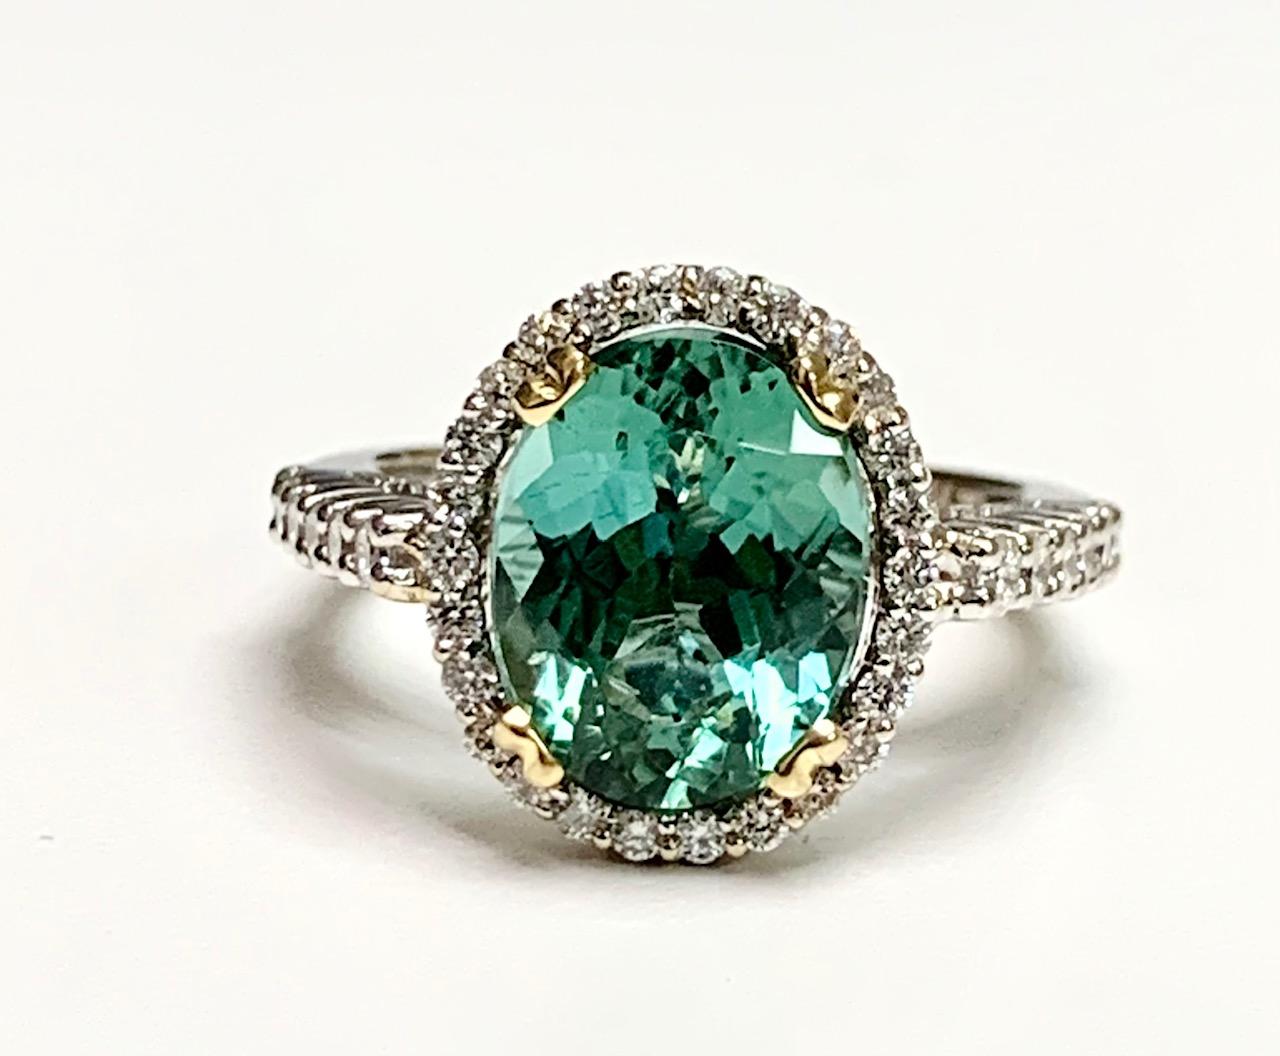 Oval Cut 4.48 Carat Green Tourmaline Diamond Cocktail Ring For Sale